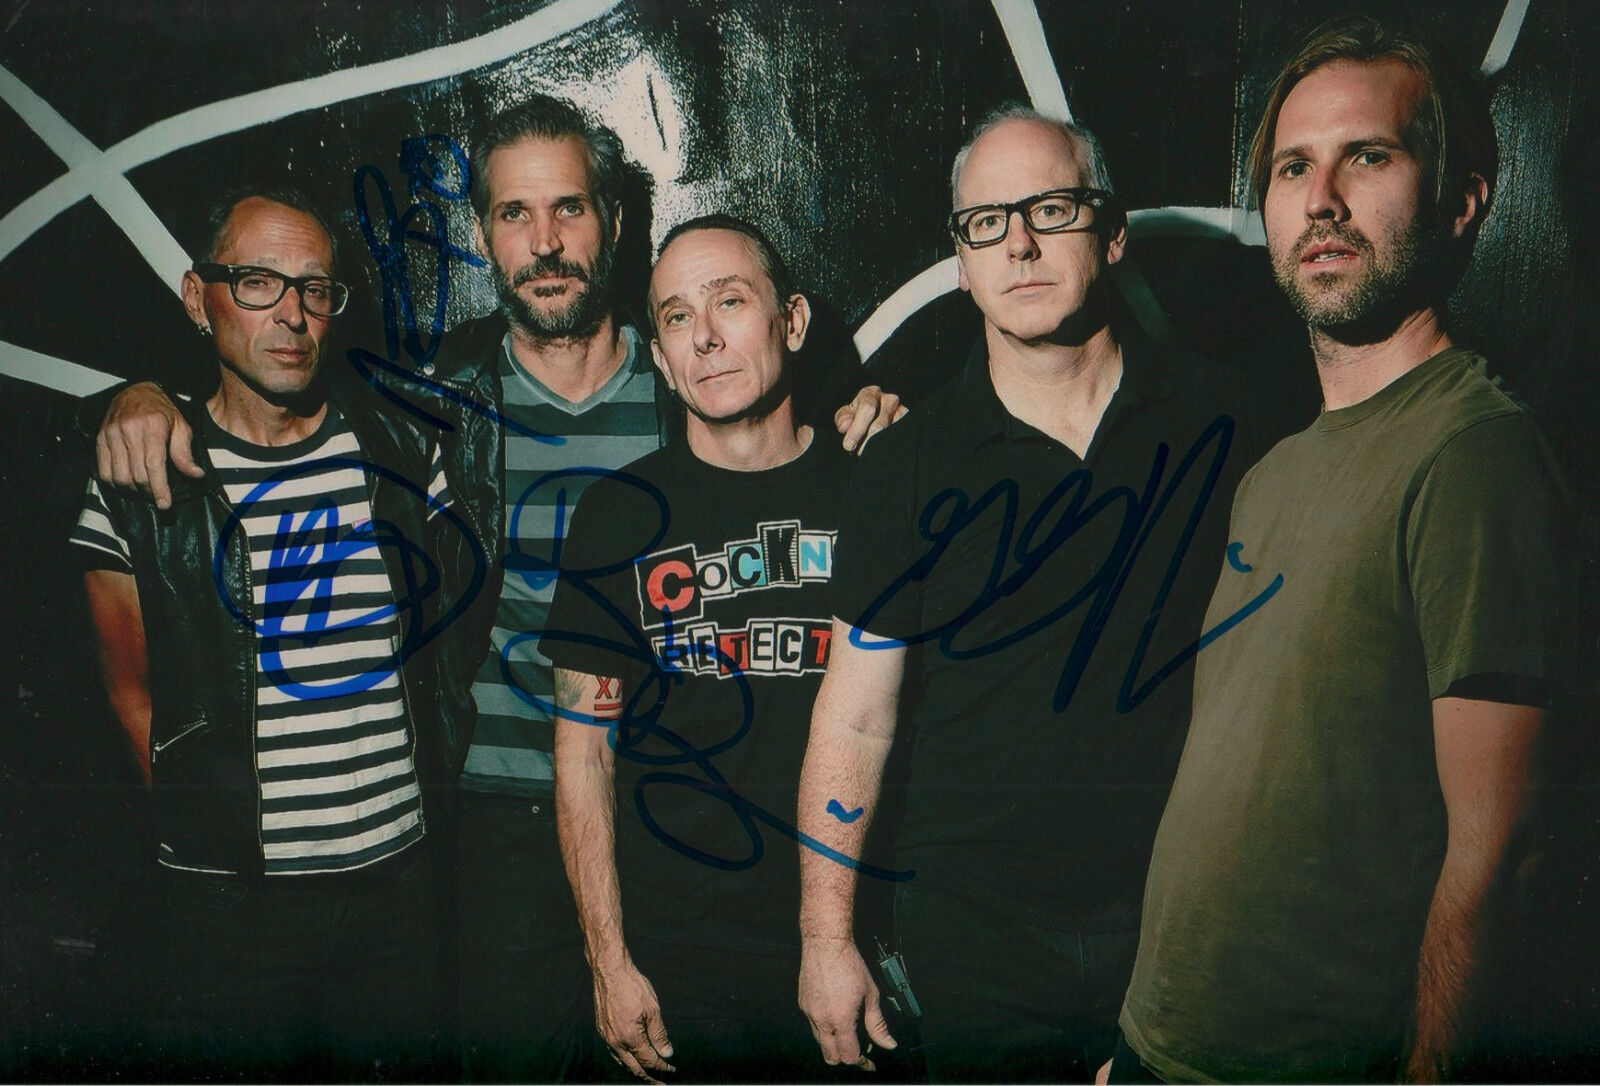 Bad Religion signed 8x12 inch Photo Poster painting autographs